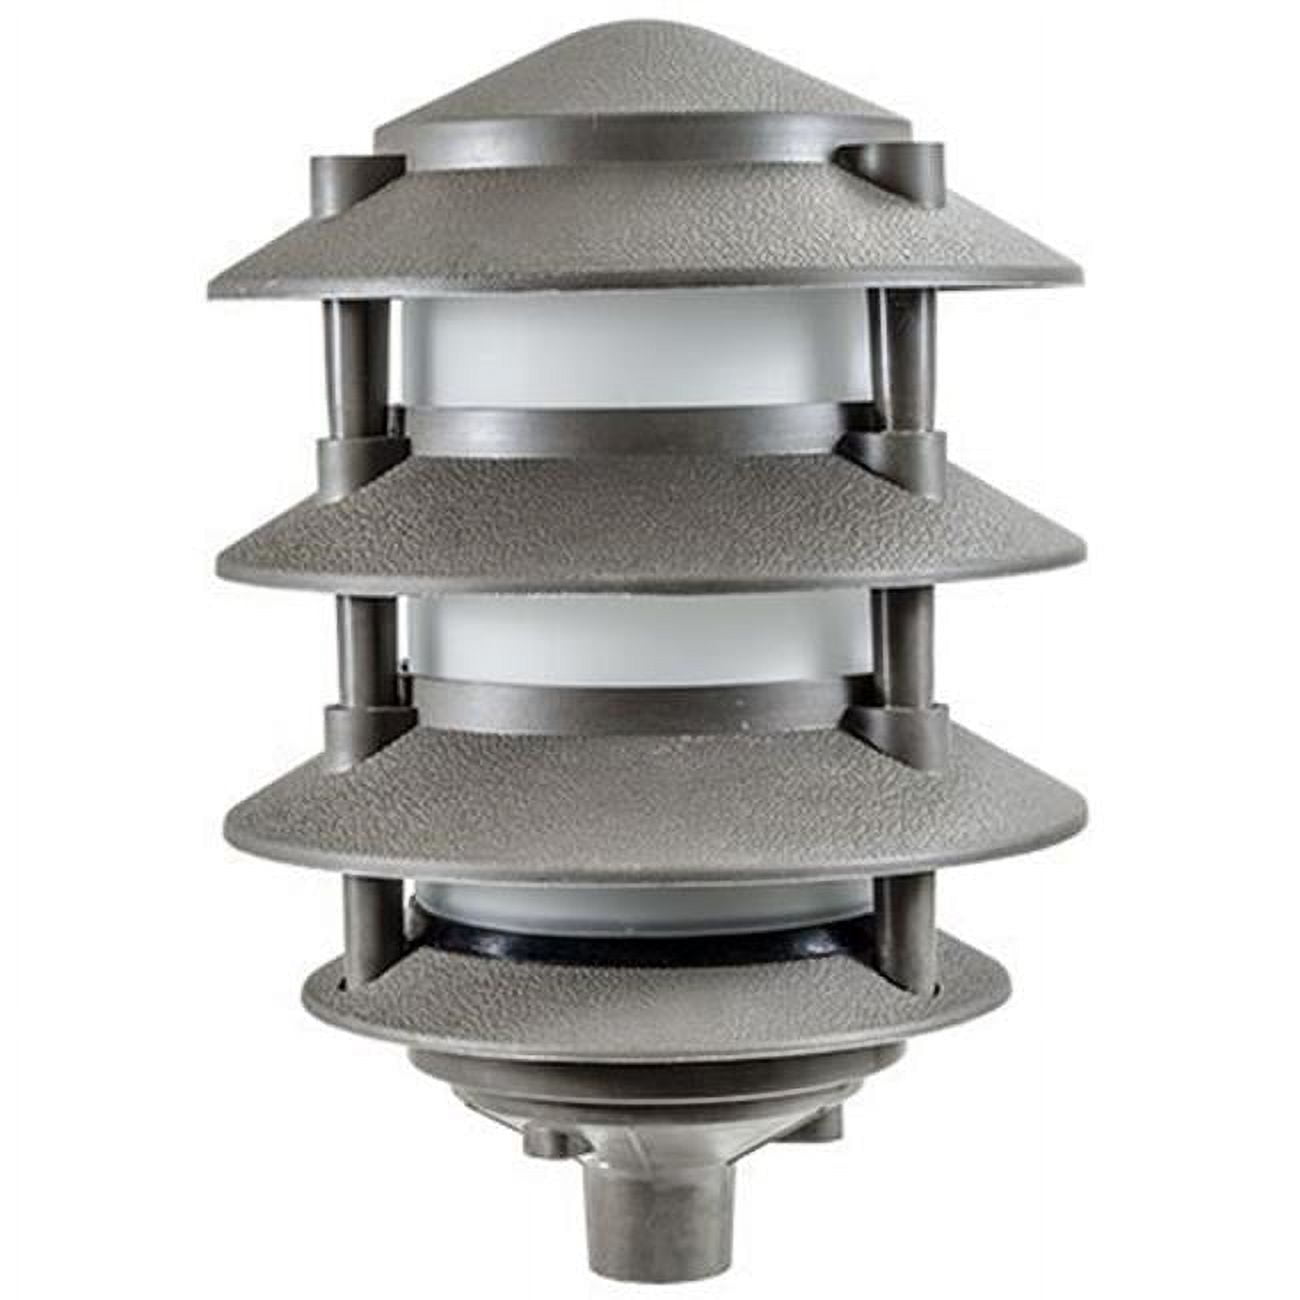 Picture of Dabmar Lighting FG5126-BZ 4 Tier 6 in. Top 0.5 in. Base 26 watt DL-S26-GU24 120 V Pagoda Fixture with Pre-Wired, Black, Bronze & Green